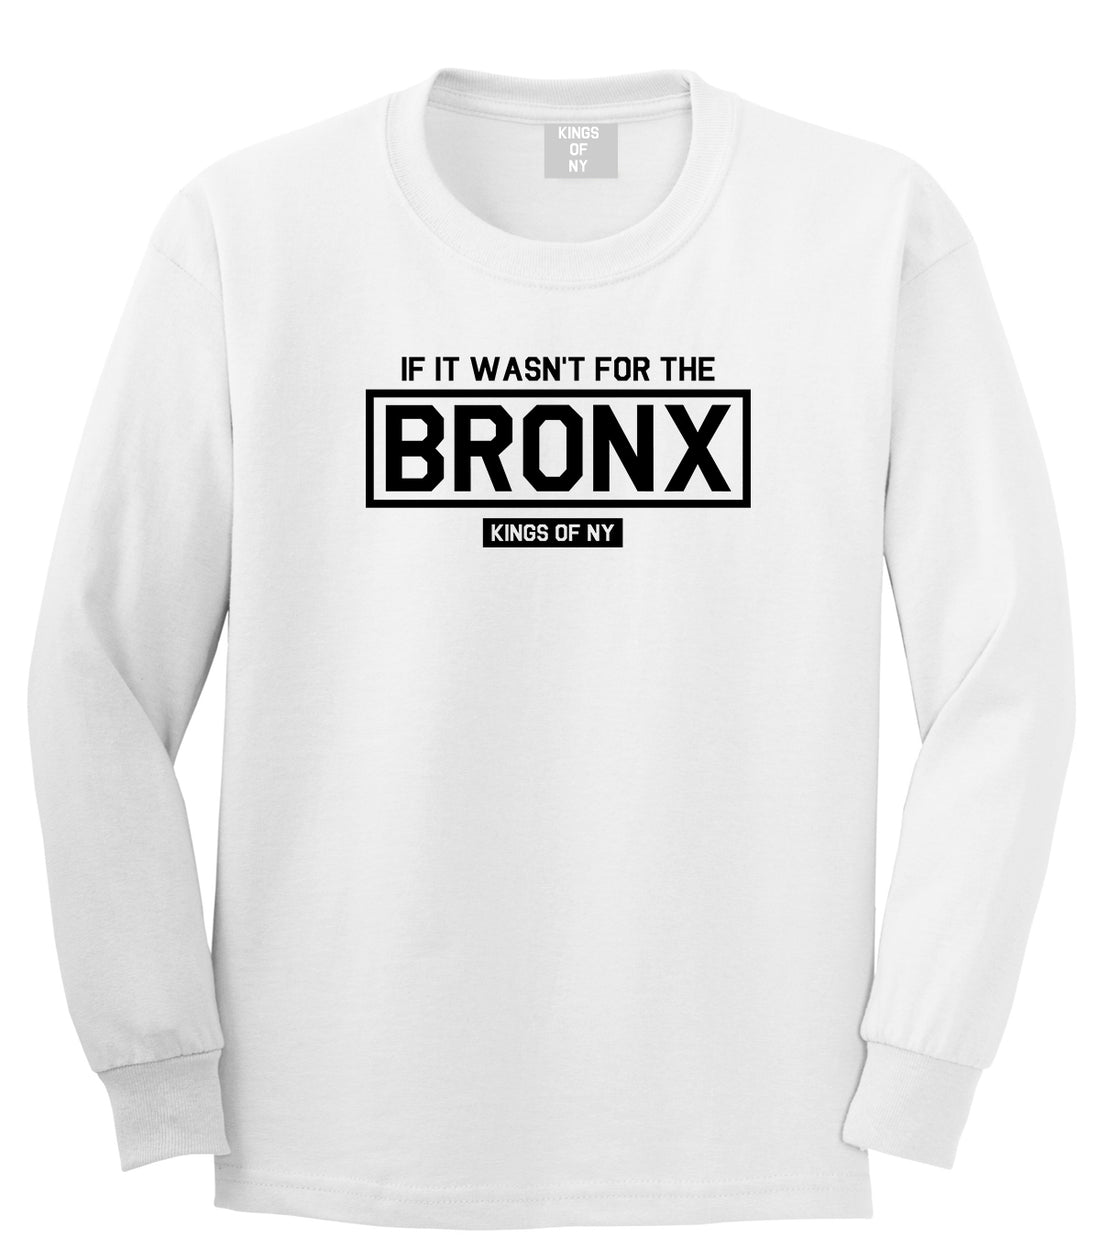 If It Wasnt For The Bronx Mens Long Sleeve T-Shirt White by Kings Of NY